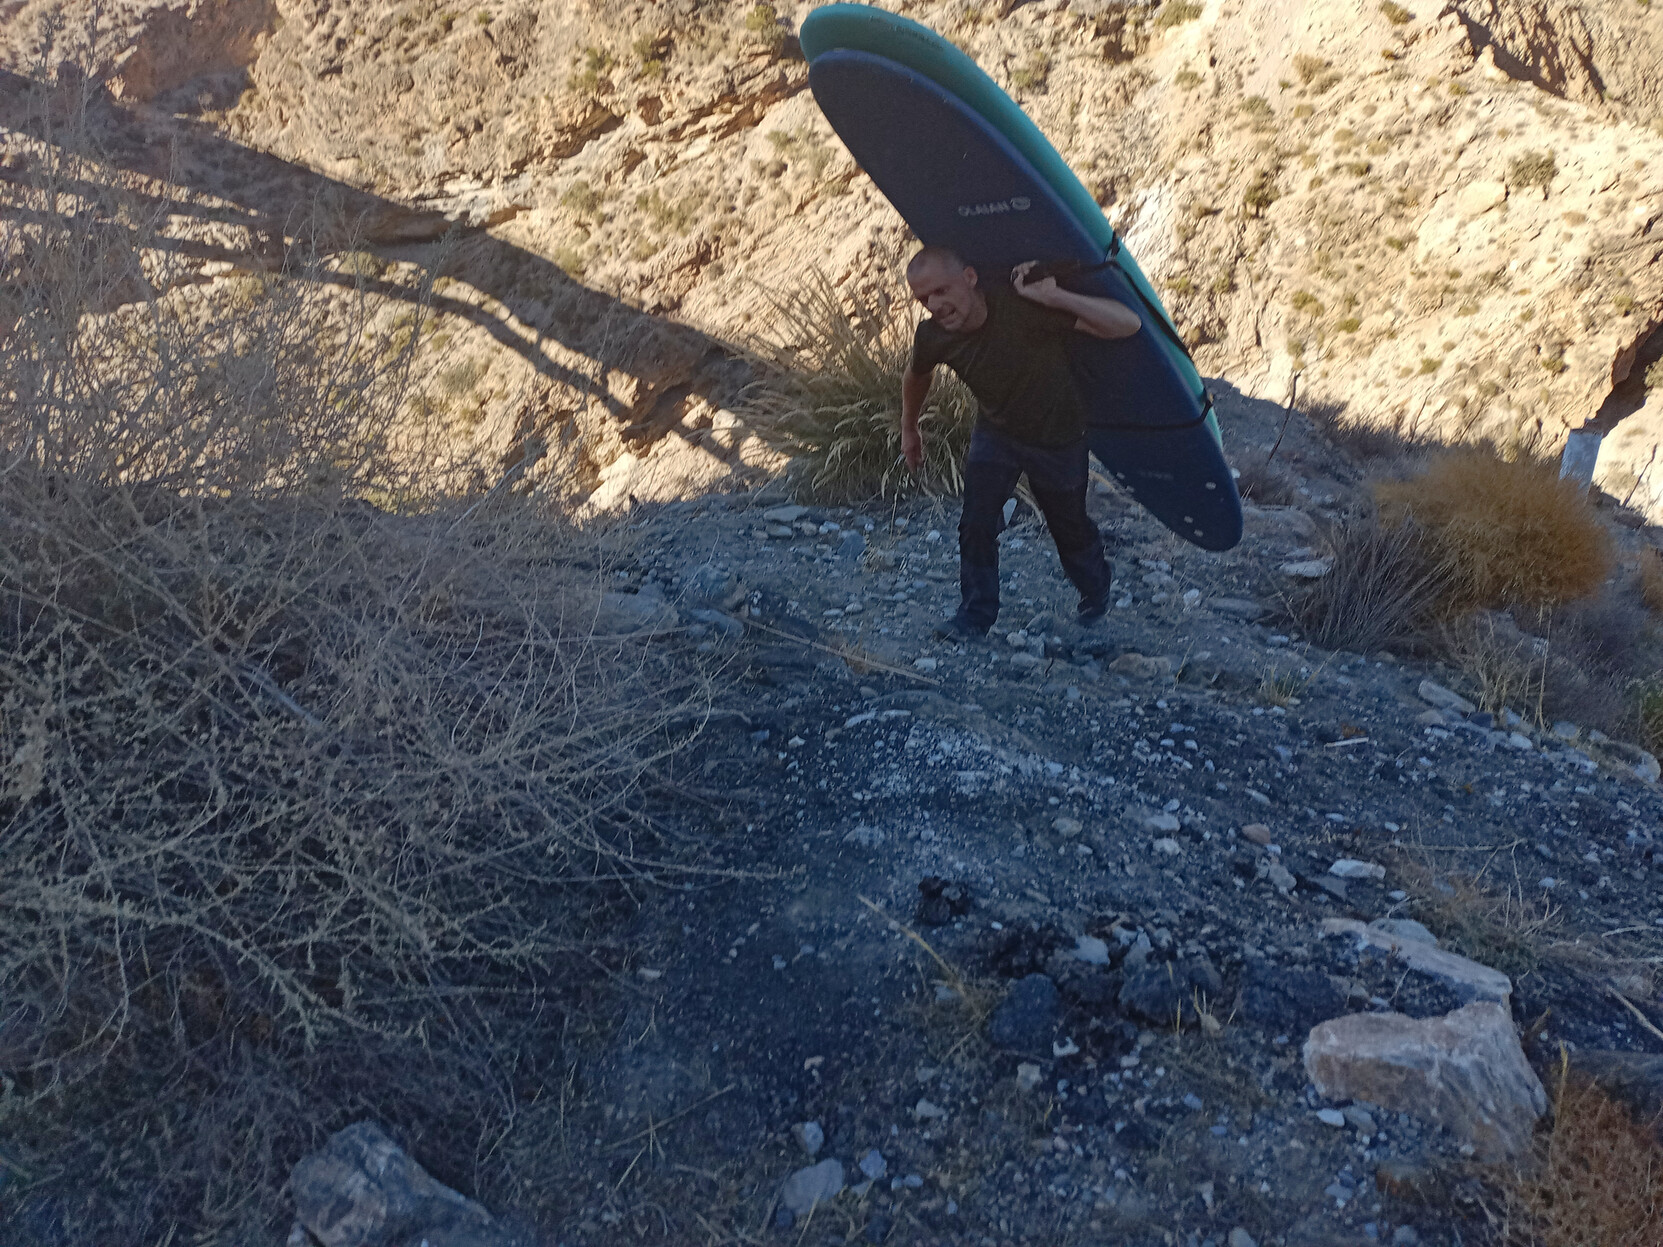 A surfboard is being carried across a steep scree slope